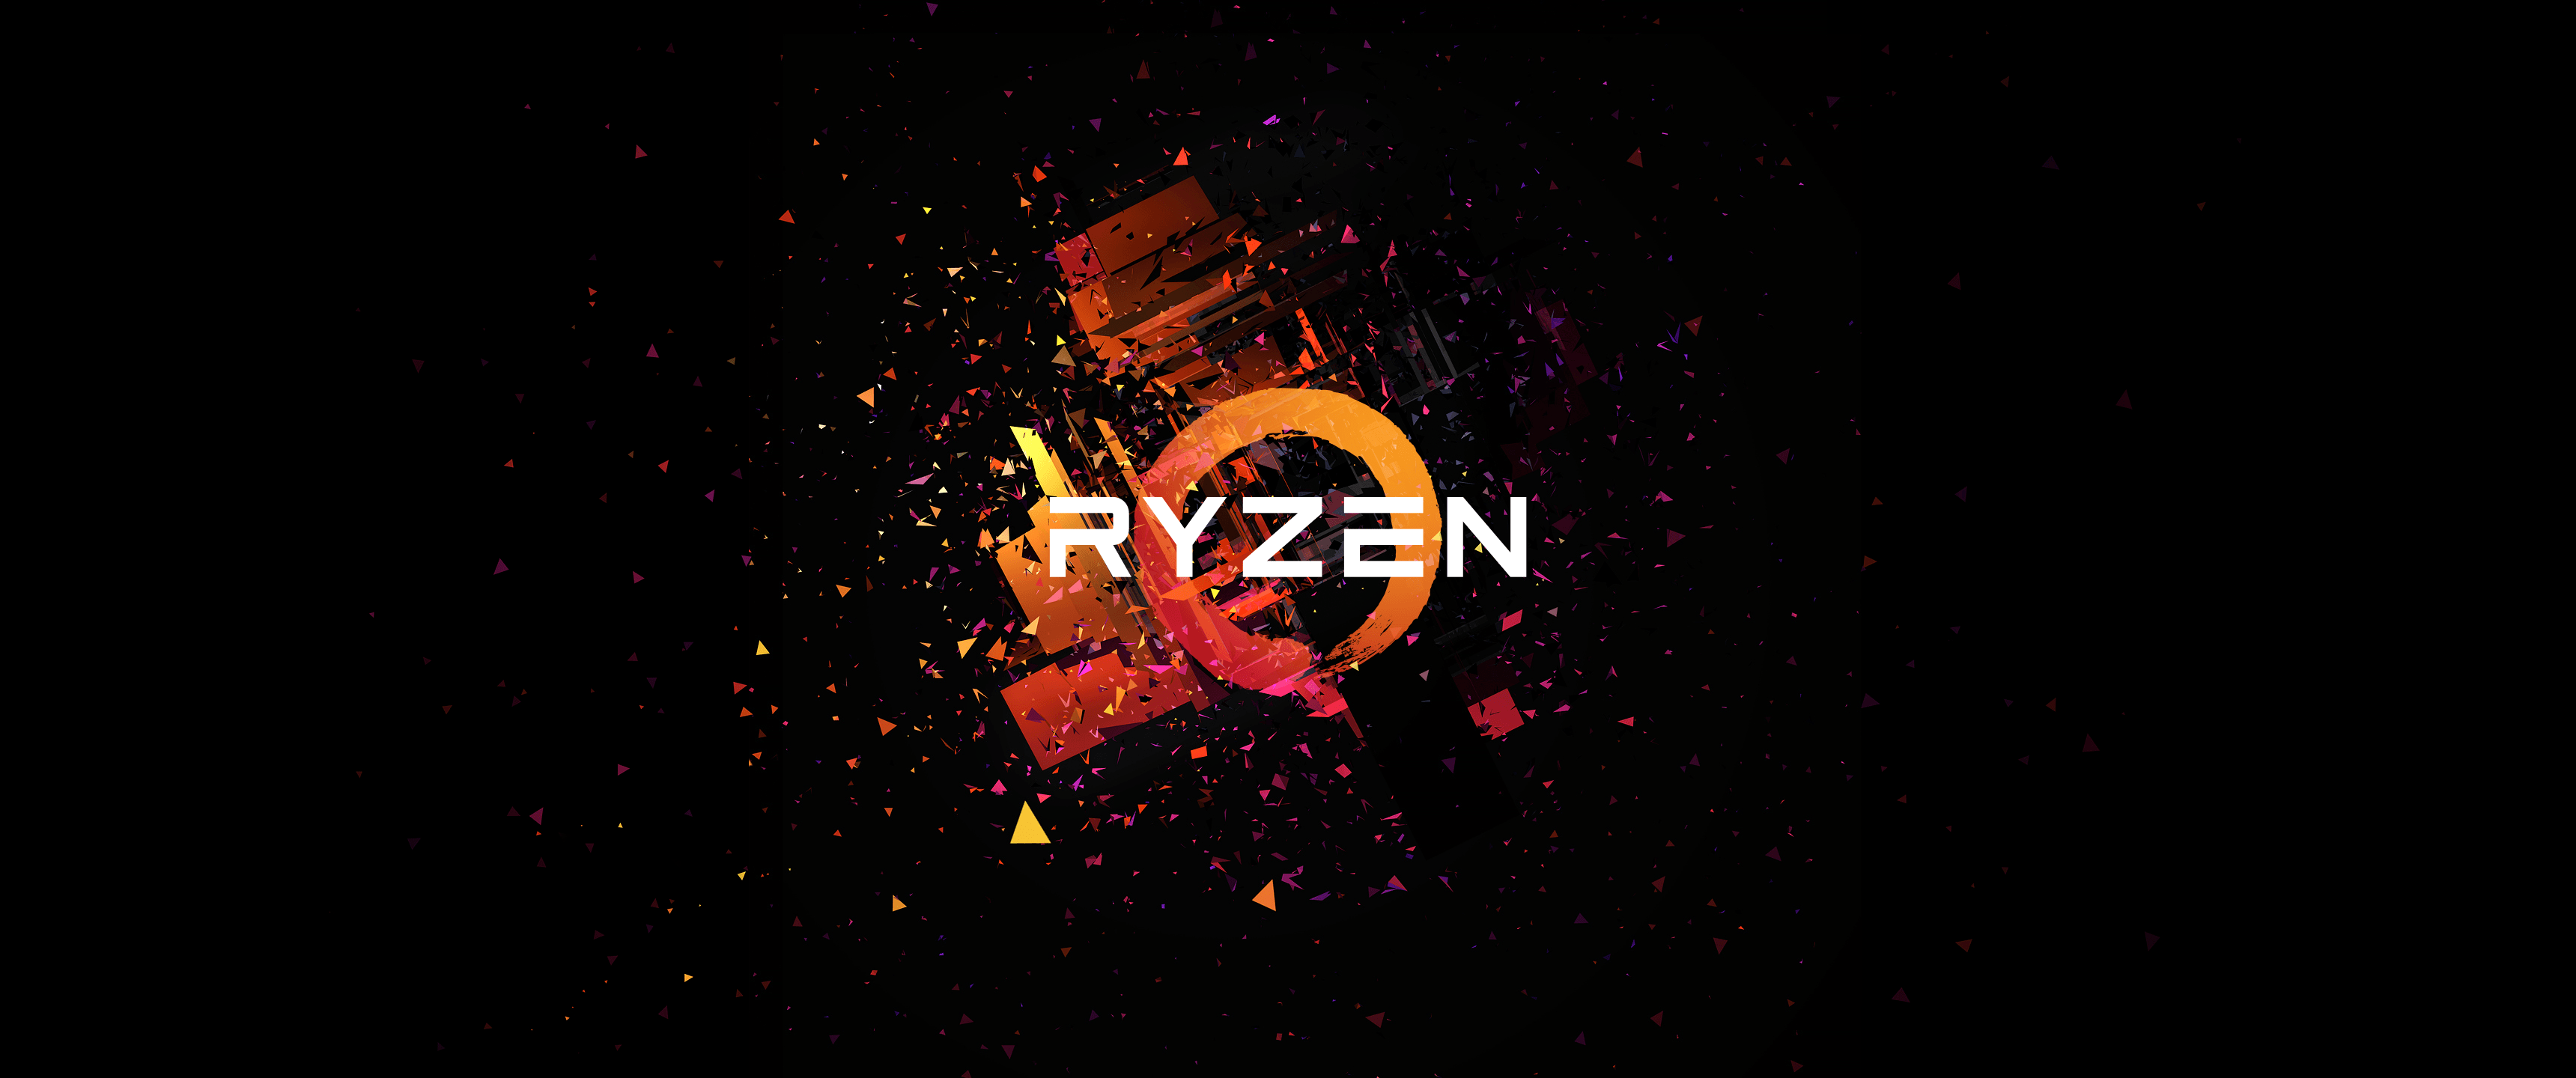 Download Amd Ryzen wallpapers for mobile phone free Amd Ryzen HD  pictures